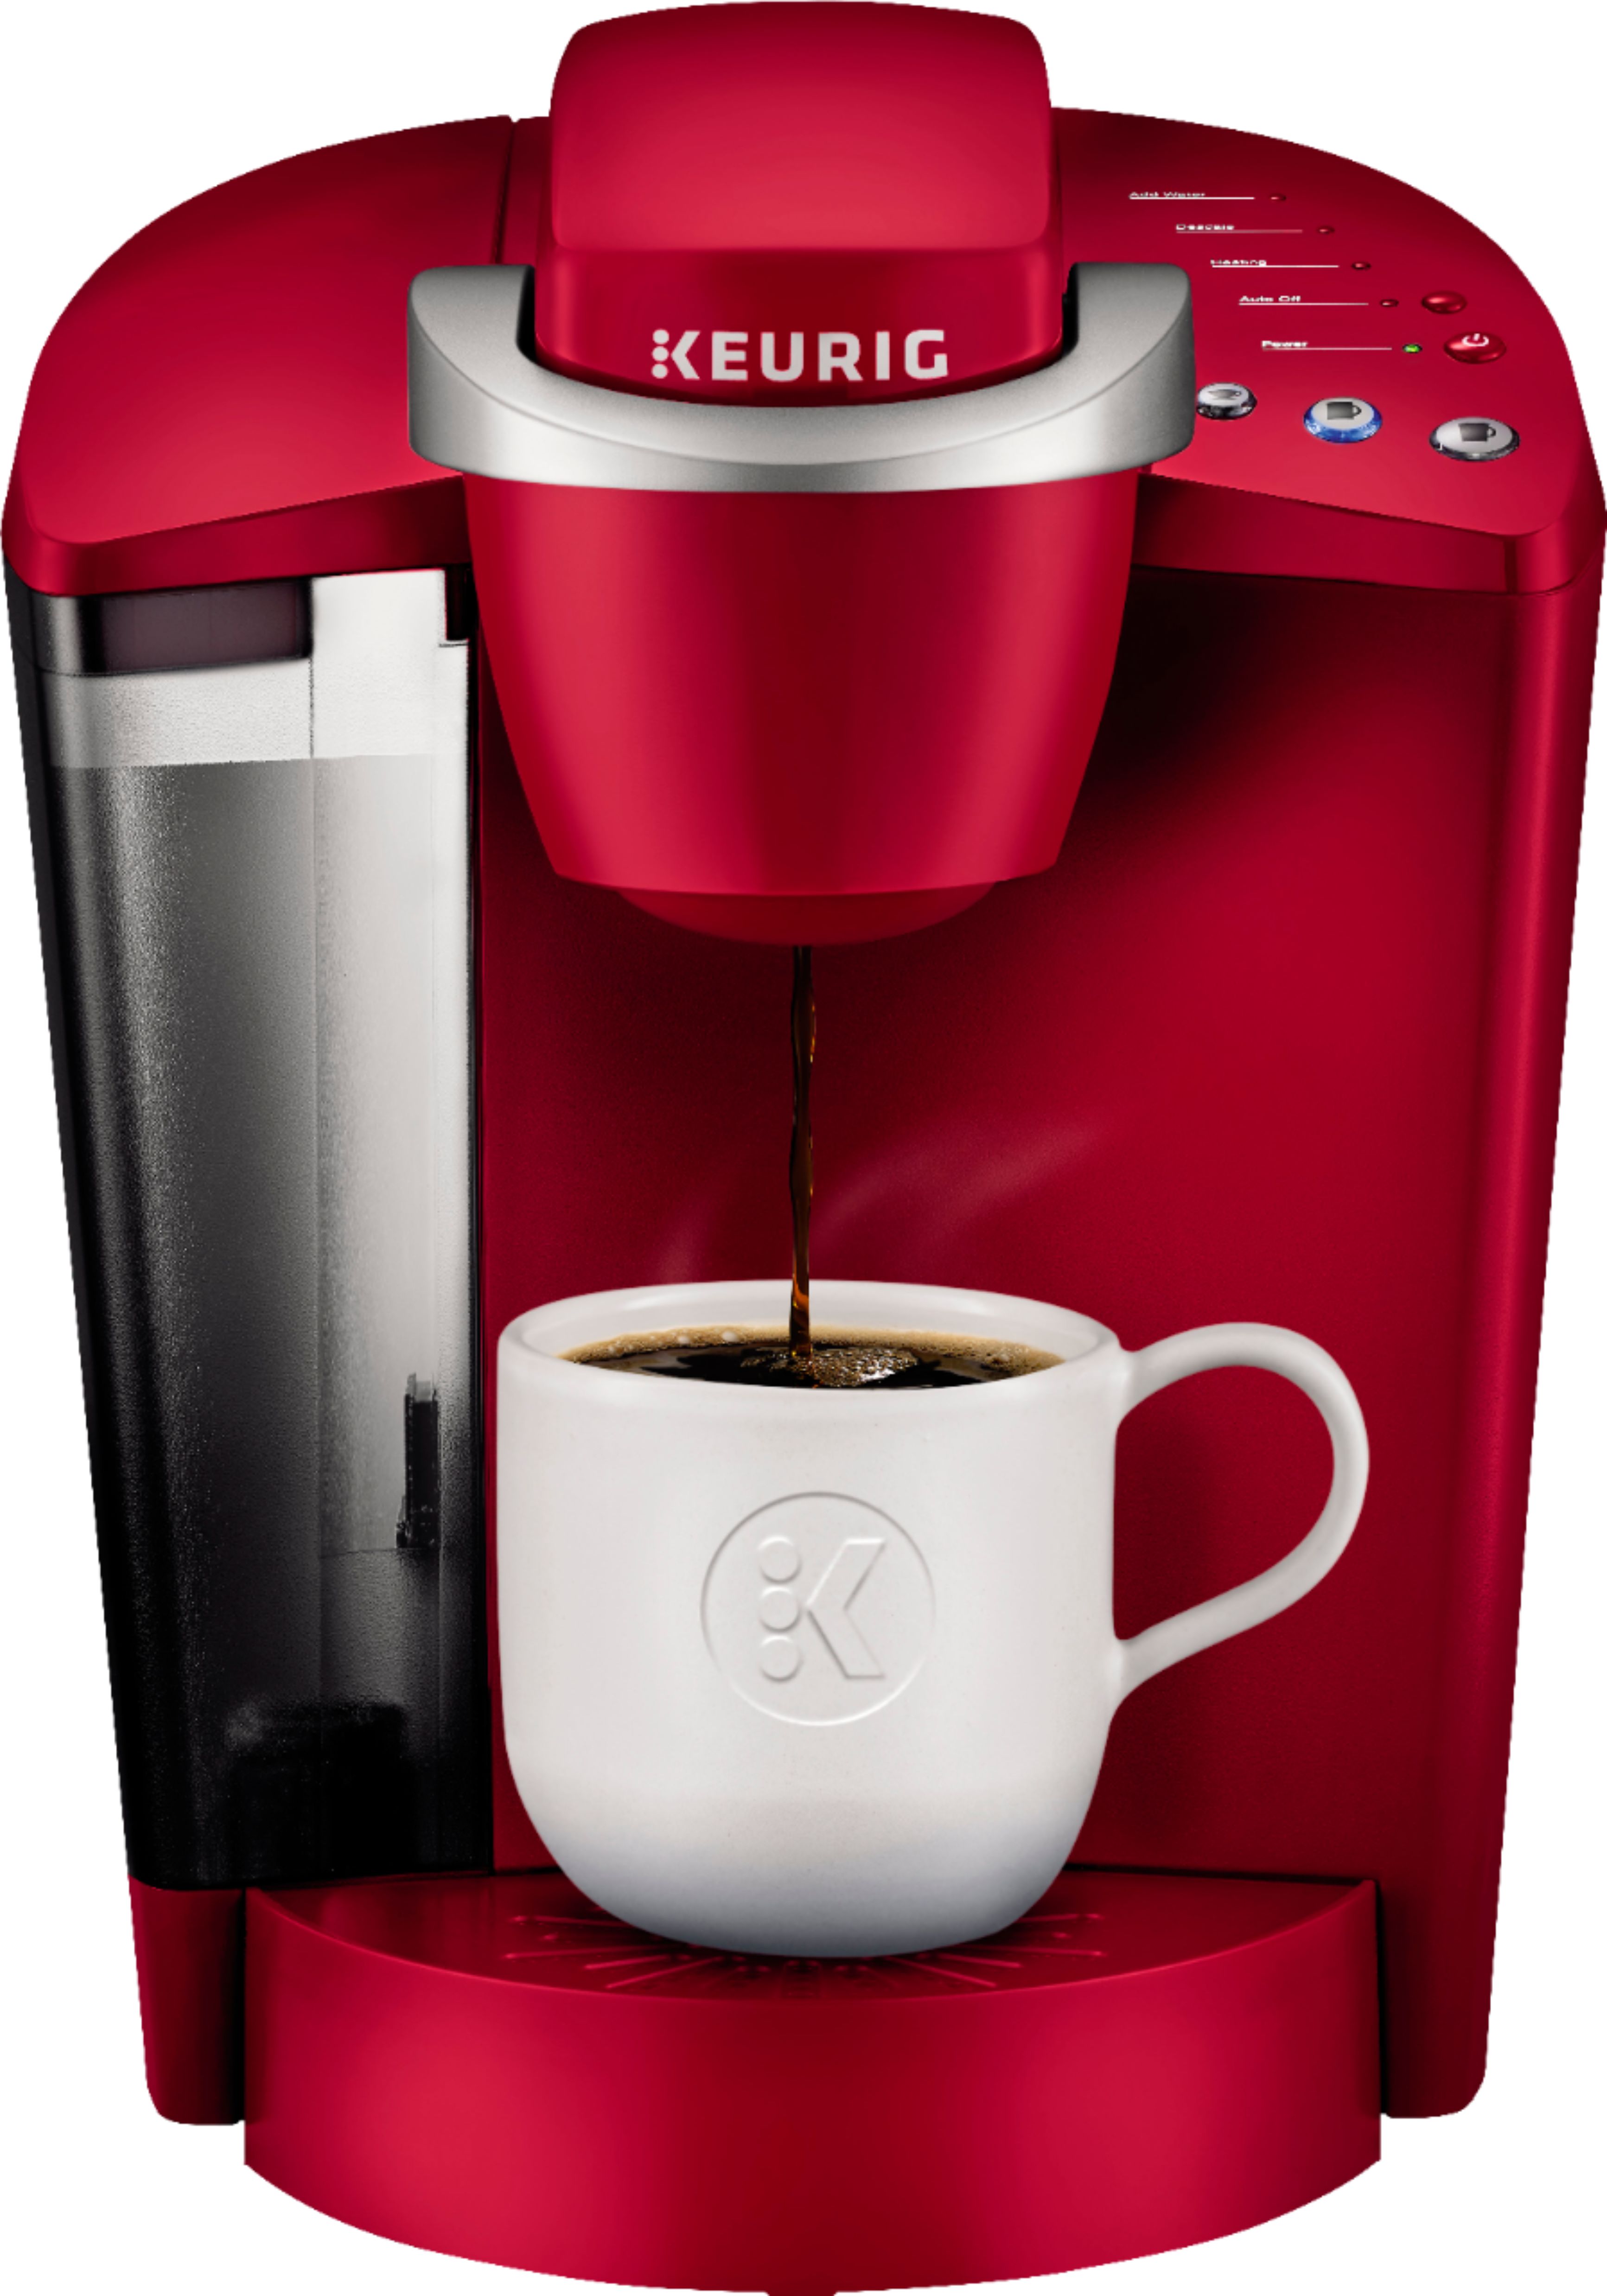 A Popular Keurig That Makes the 'Perfect' Coffee Is on Sale at